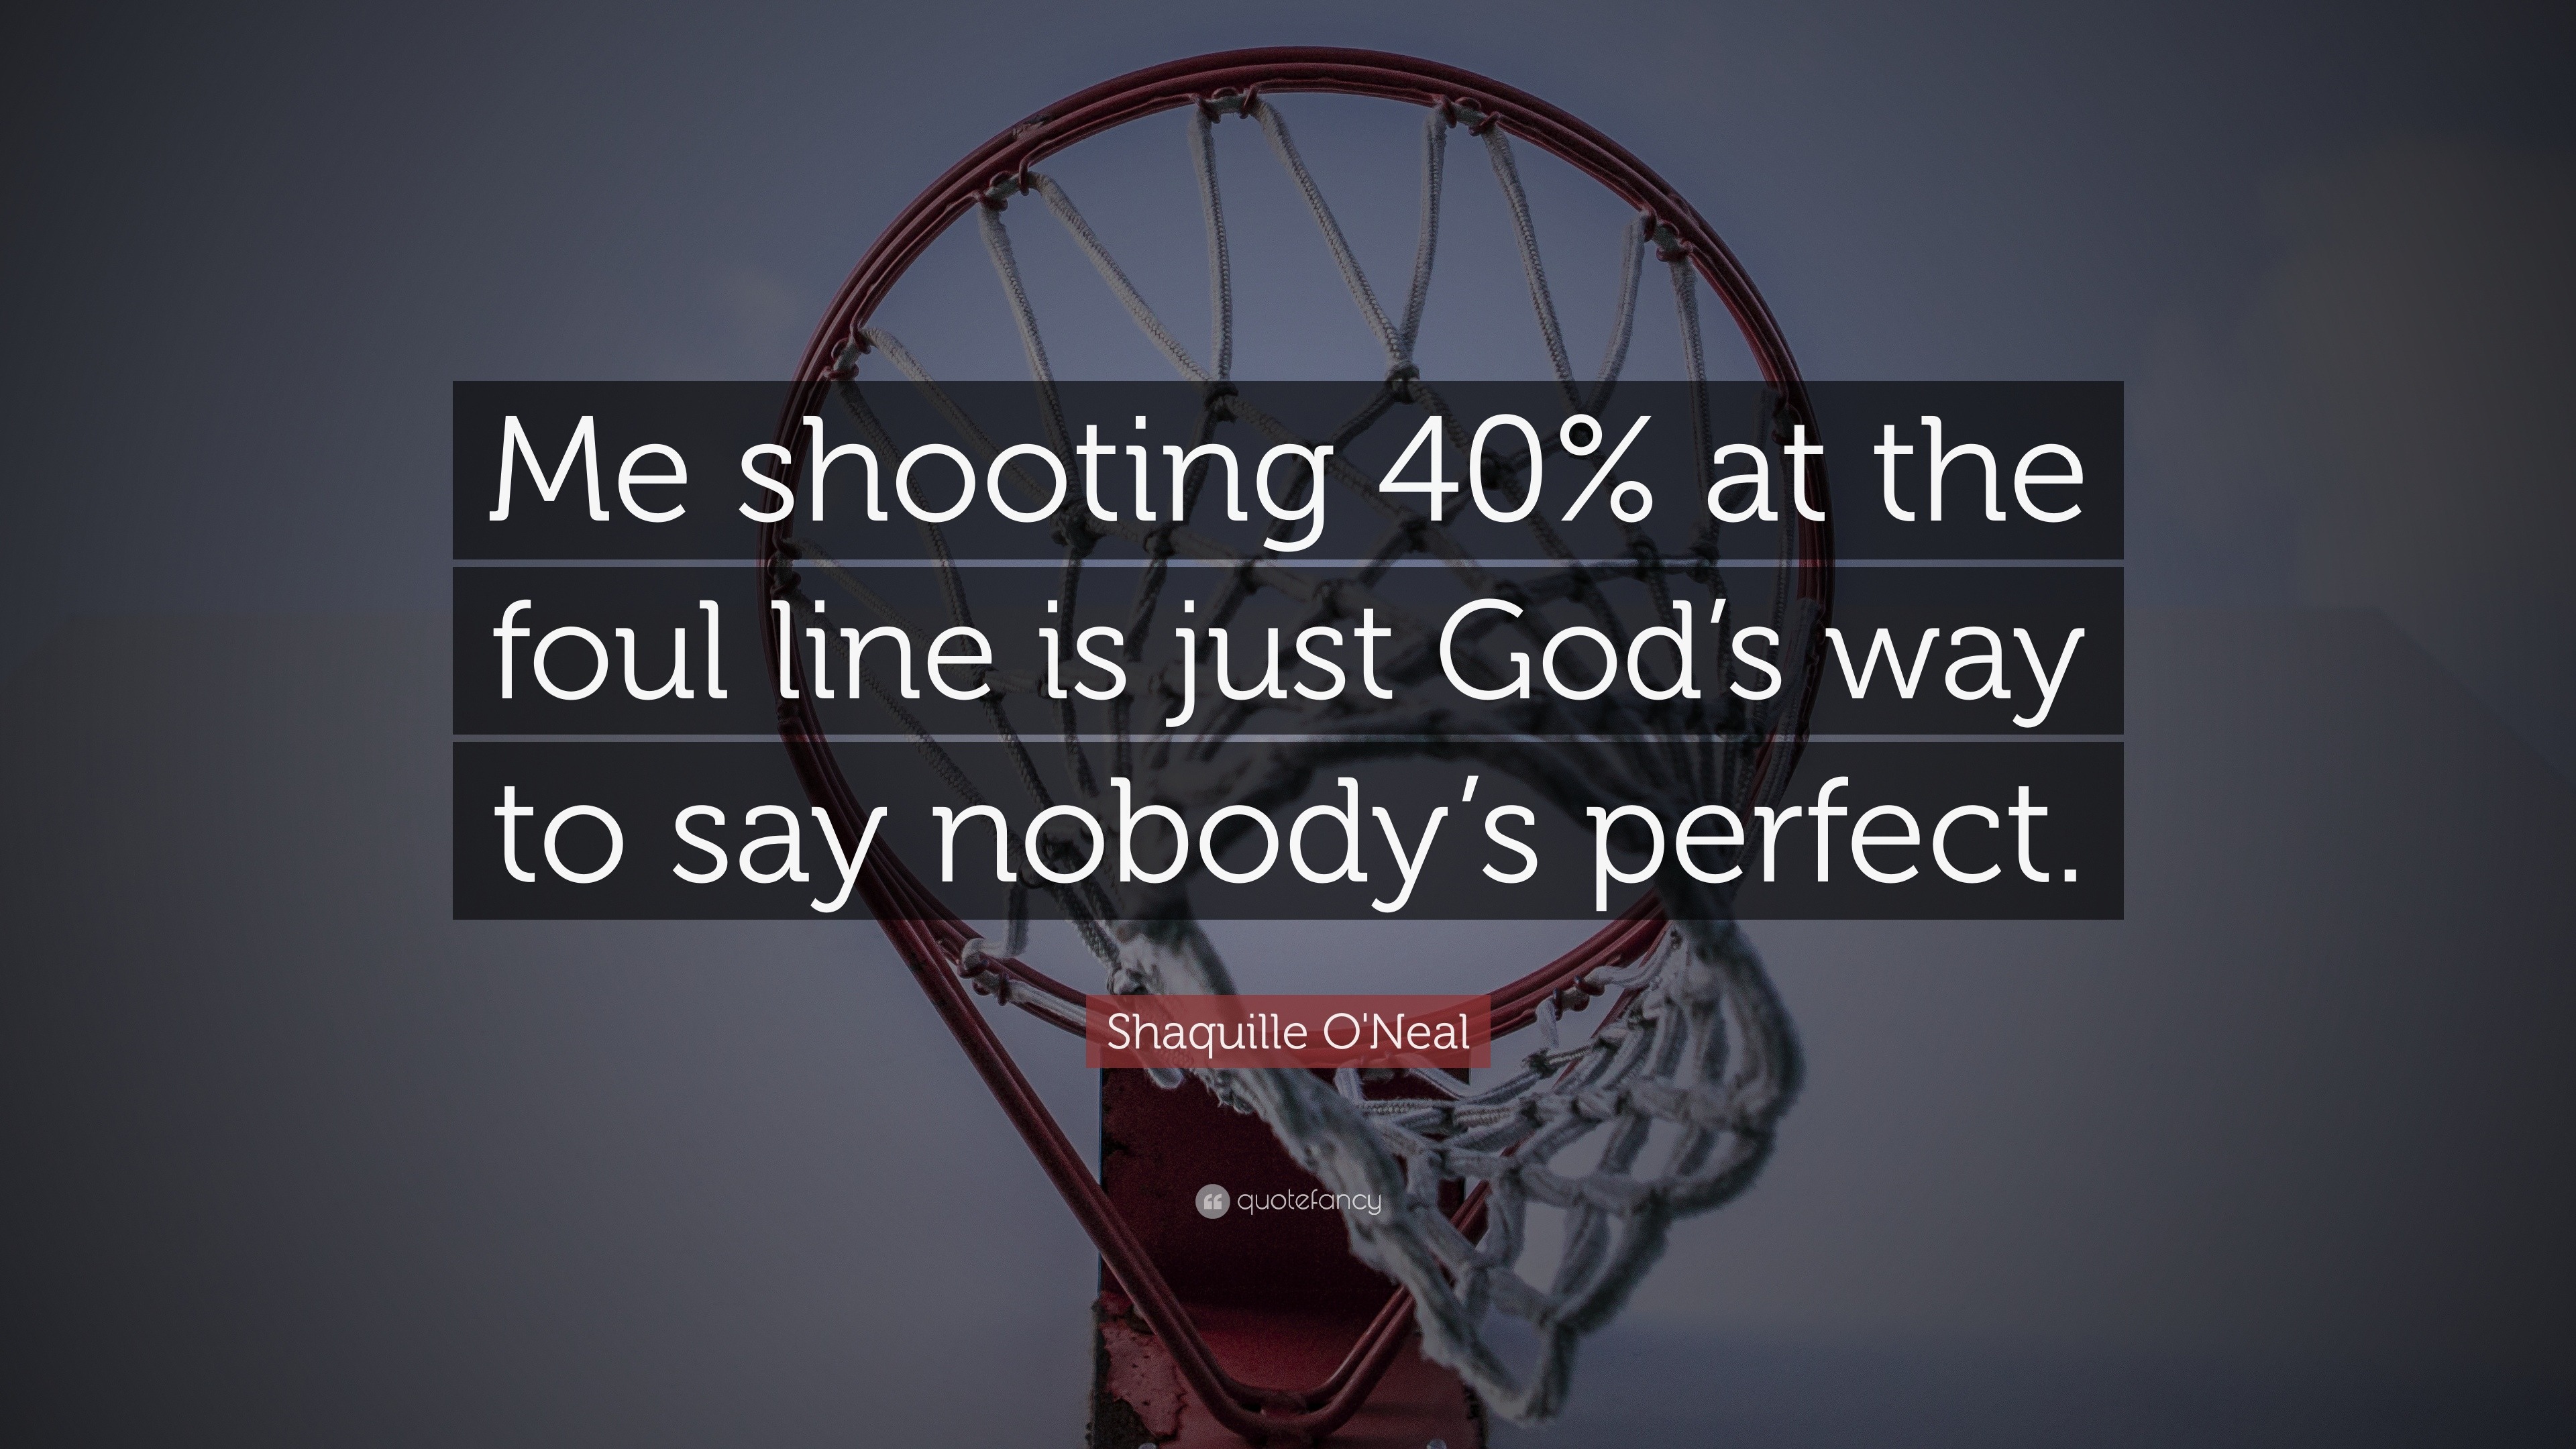 Shaquille O'Neal Quote: “Me shooting 40% at the foul line is just God’s ...